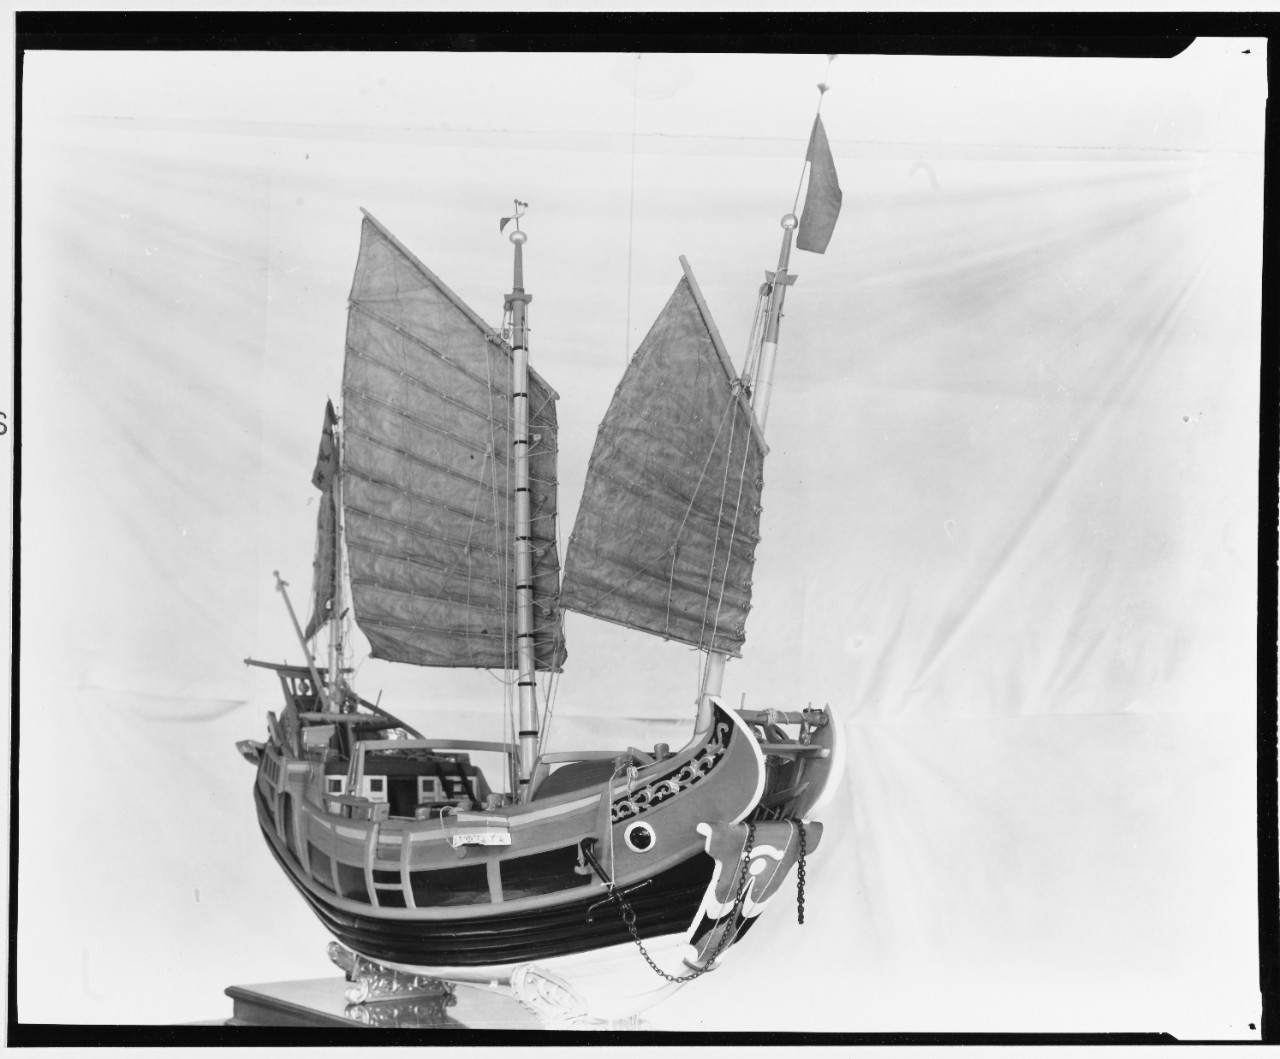 Model of Chinese Junk, of the Fukien Province Type. 